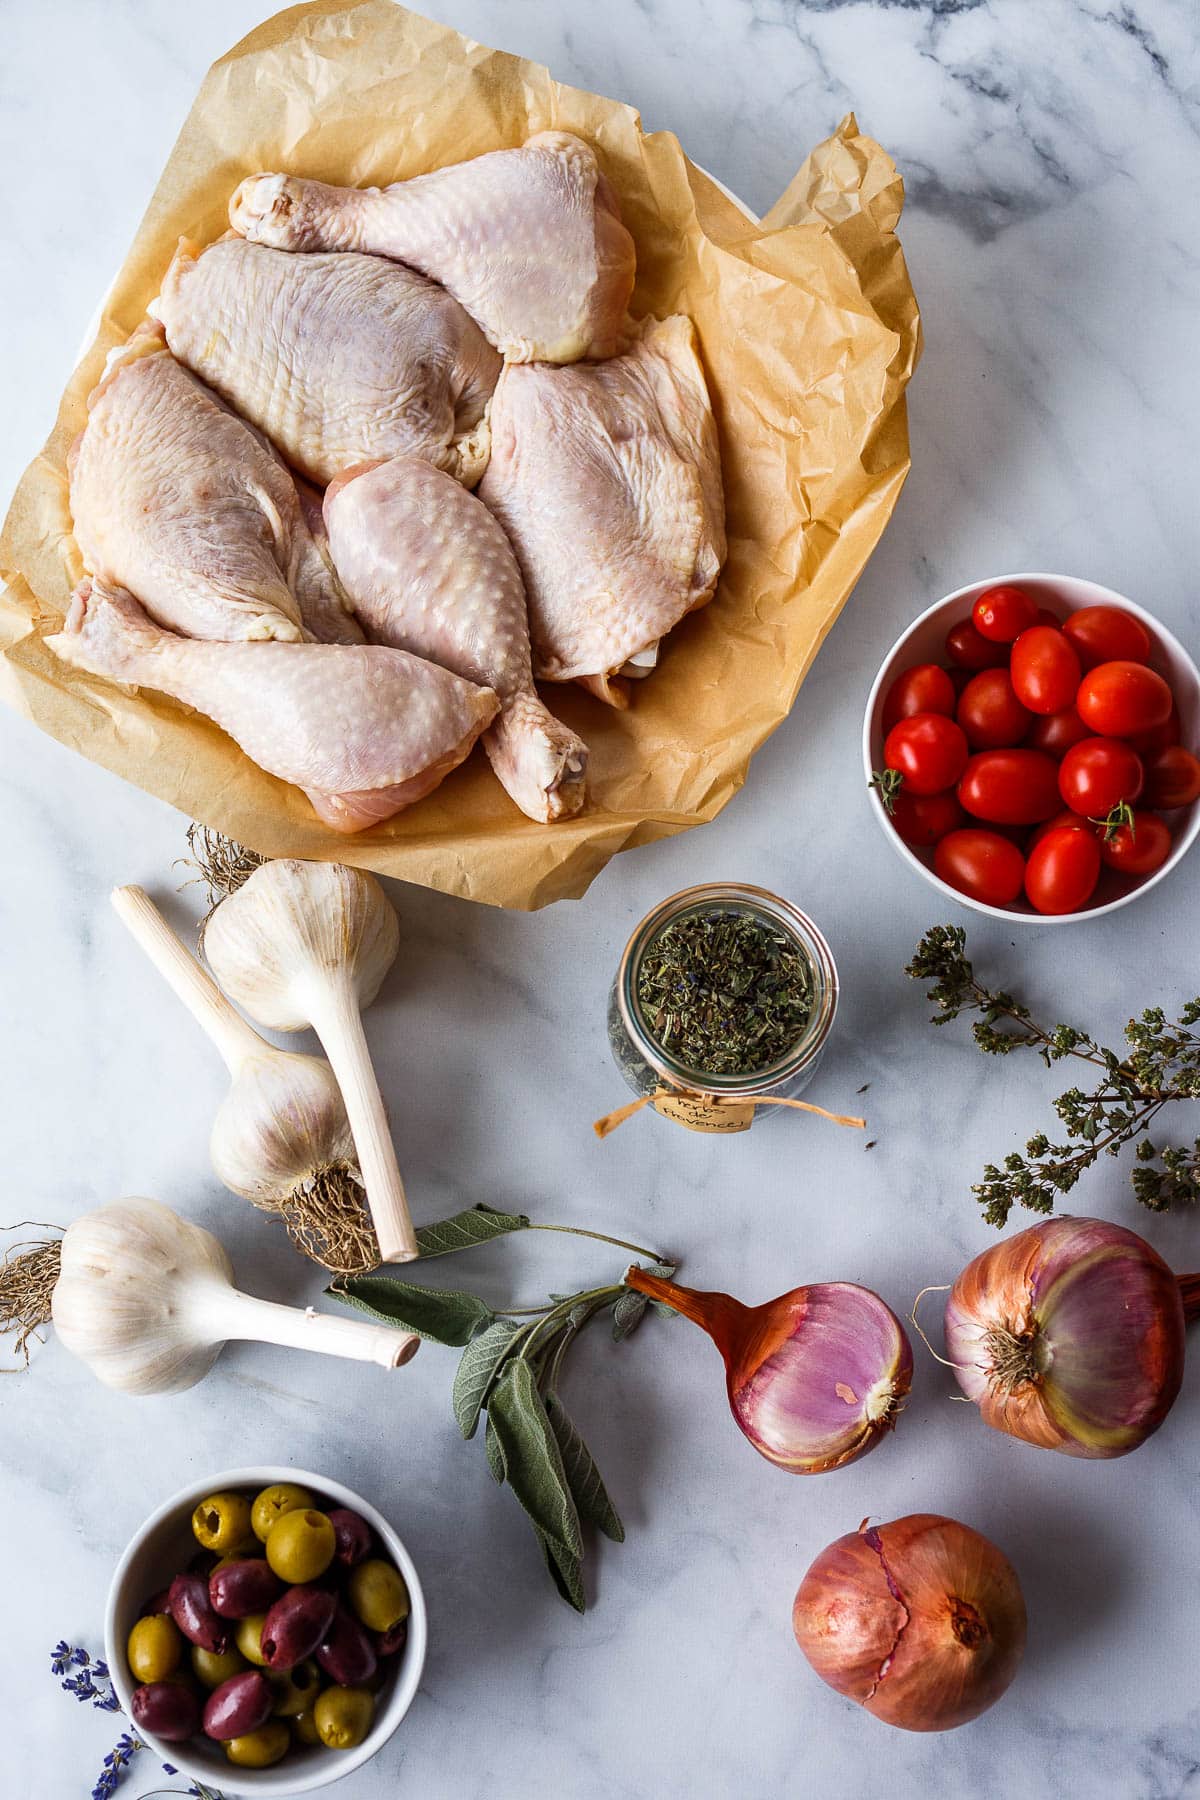 Ingredients for Chicken Provençal-Chicken thighs and legs with herbs de Provence, tomatoes, shallots, garlic, olives.